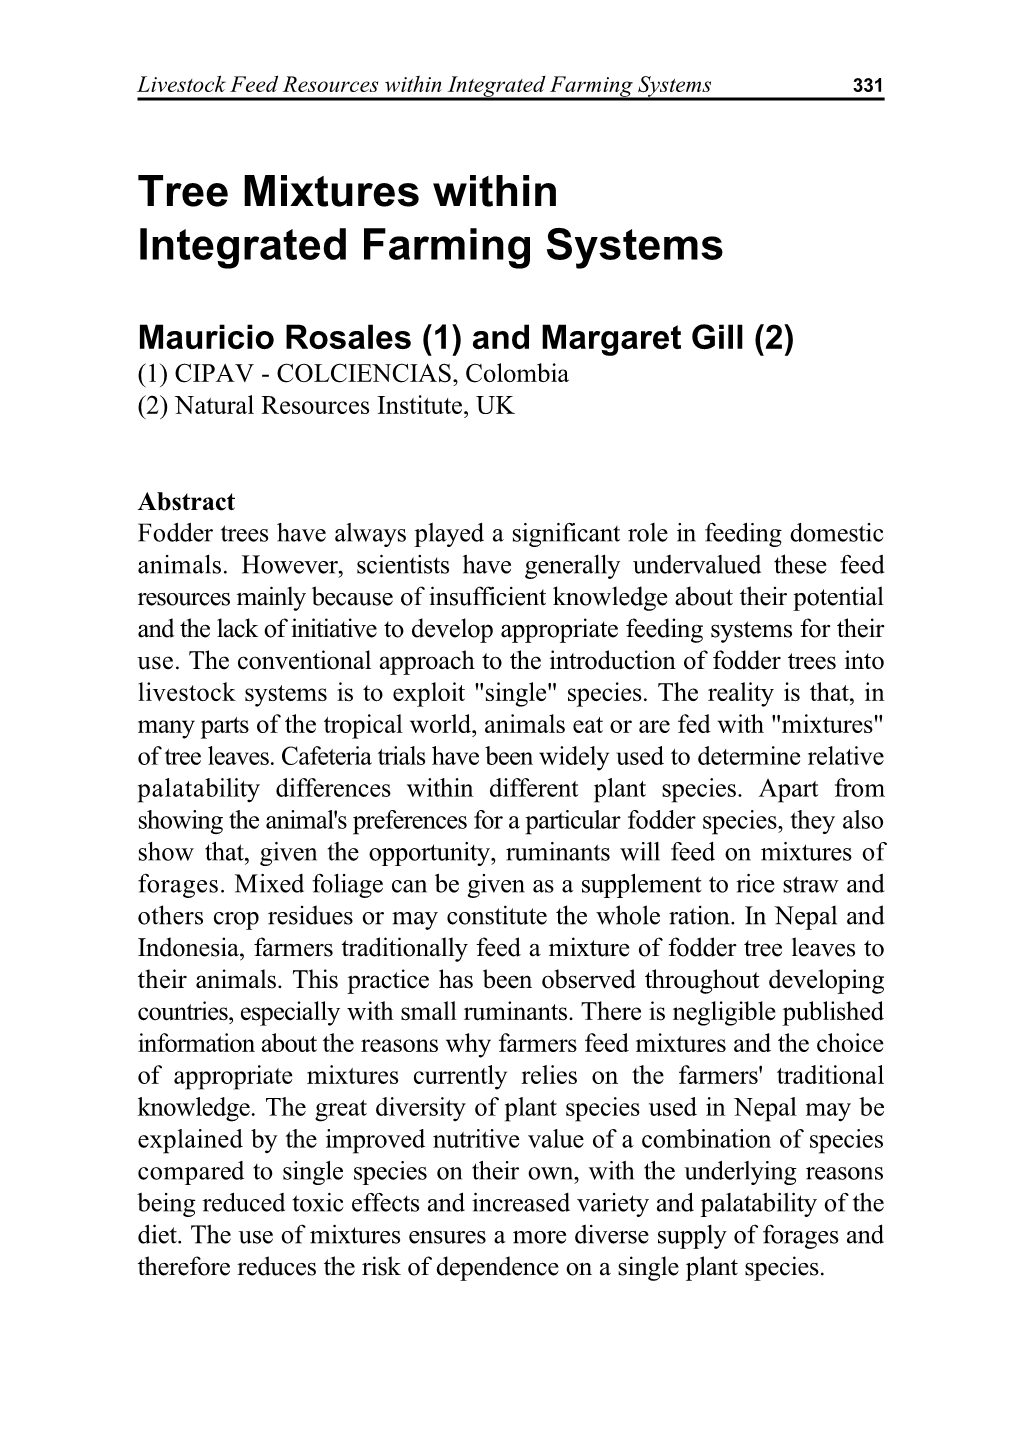 Tree Mixtures Within Integrated Farming Systems